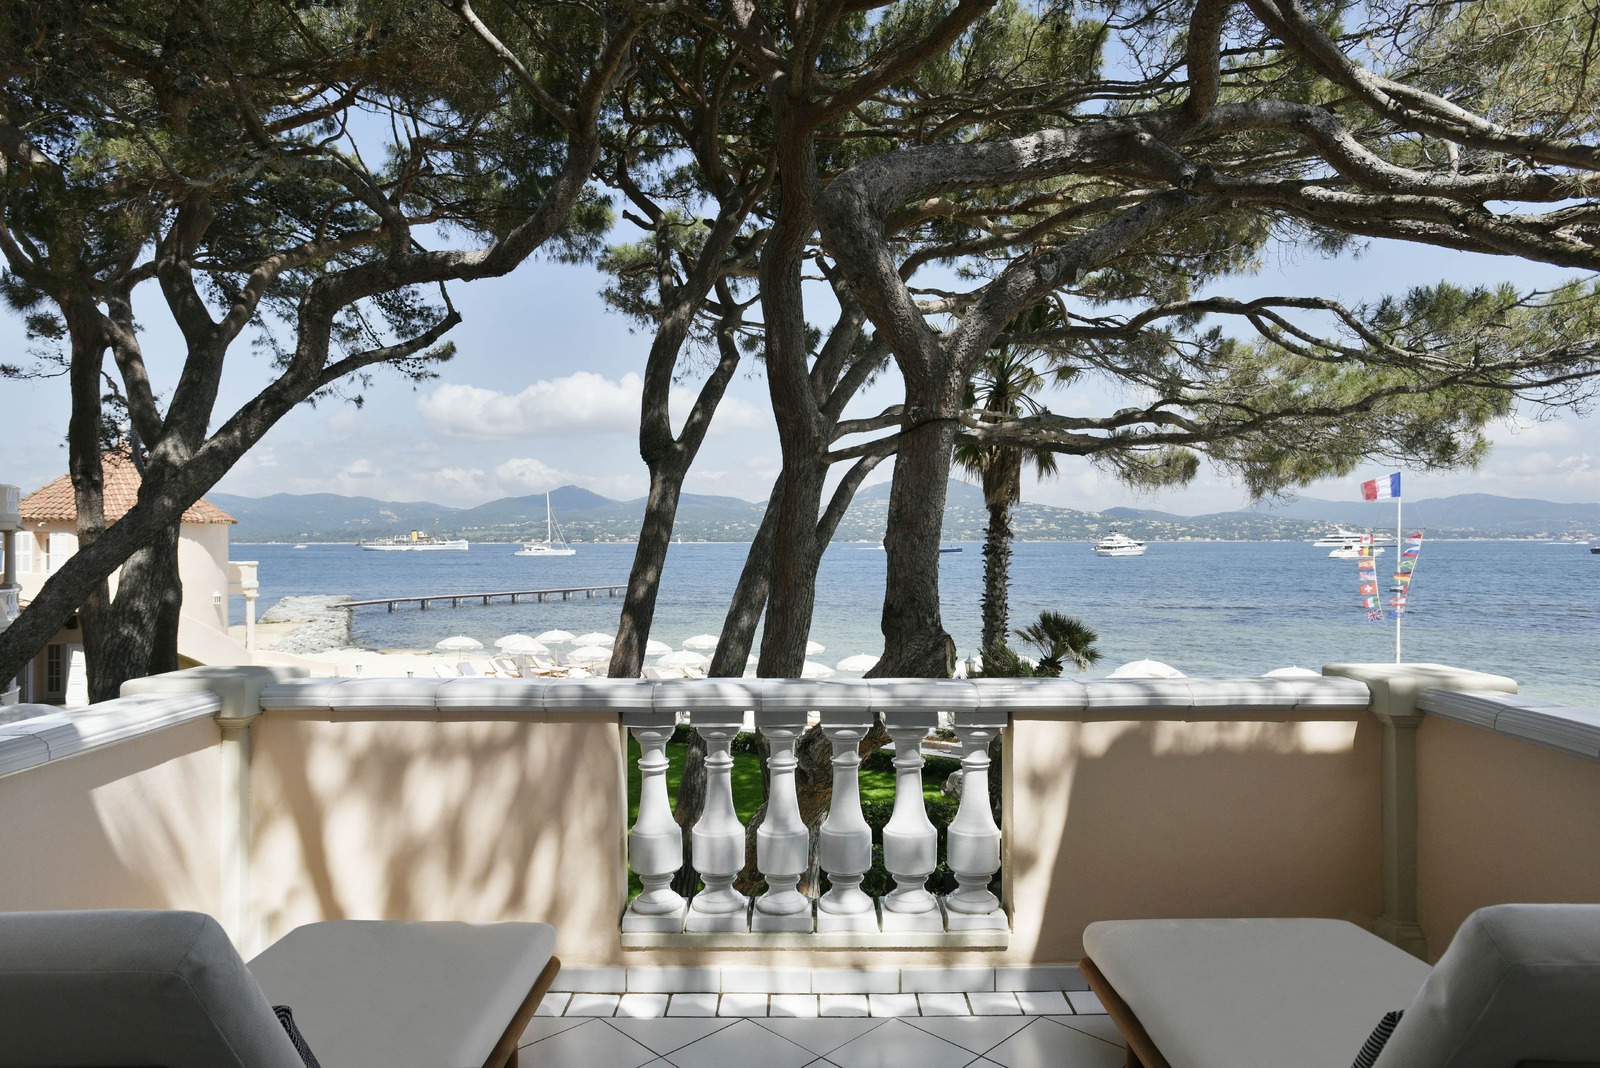 Cheval Blanc St Tropez- St Tropez, France Hotels- Deluxe Hotels in St Tropez-  GDS Reservation Codes